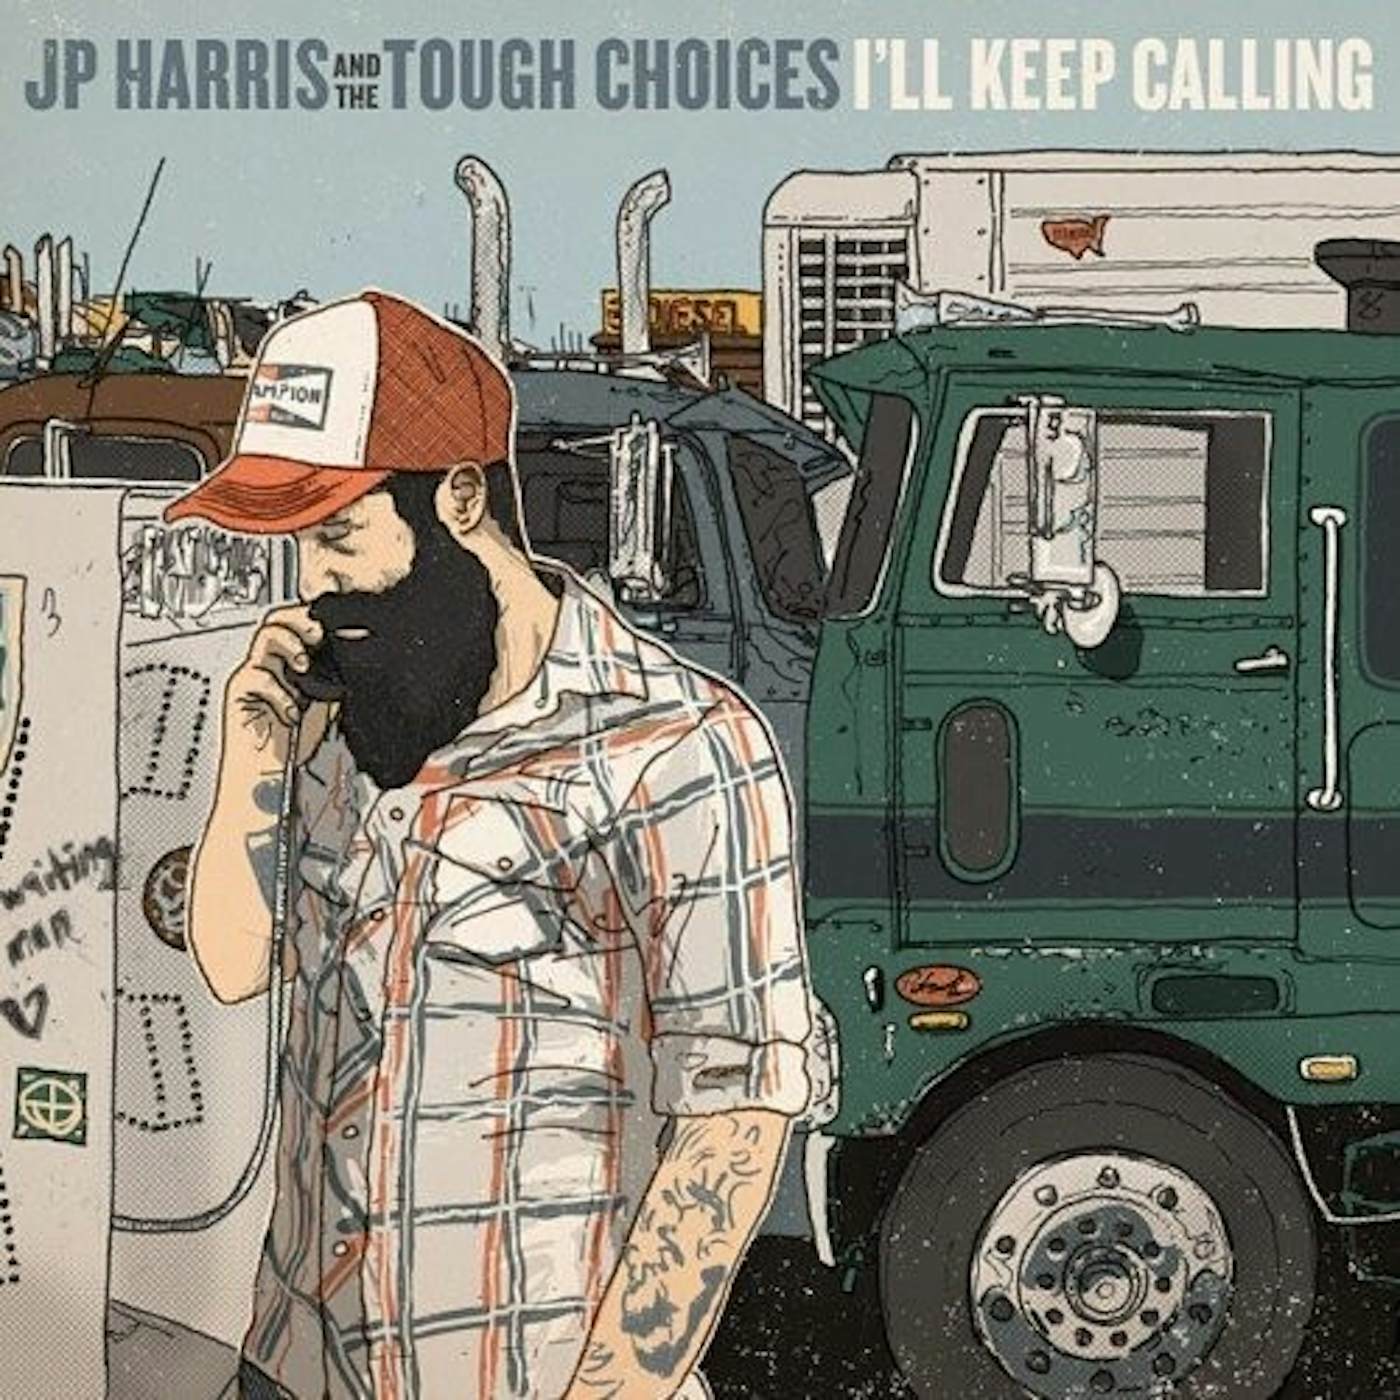 JP Harris and the Tough Choices